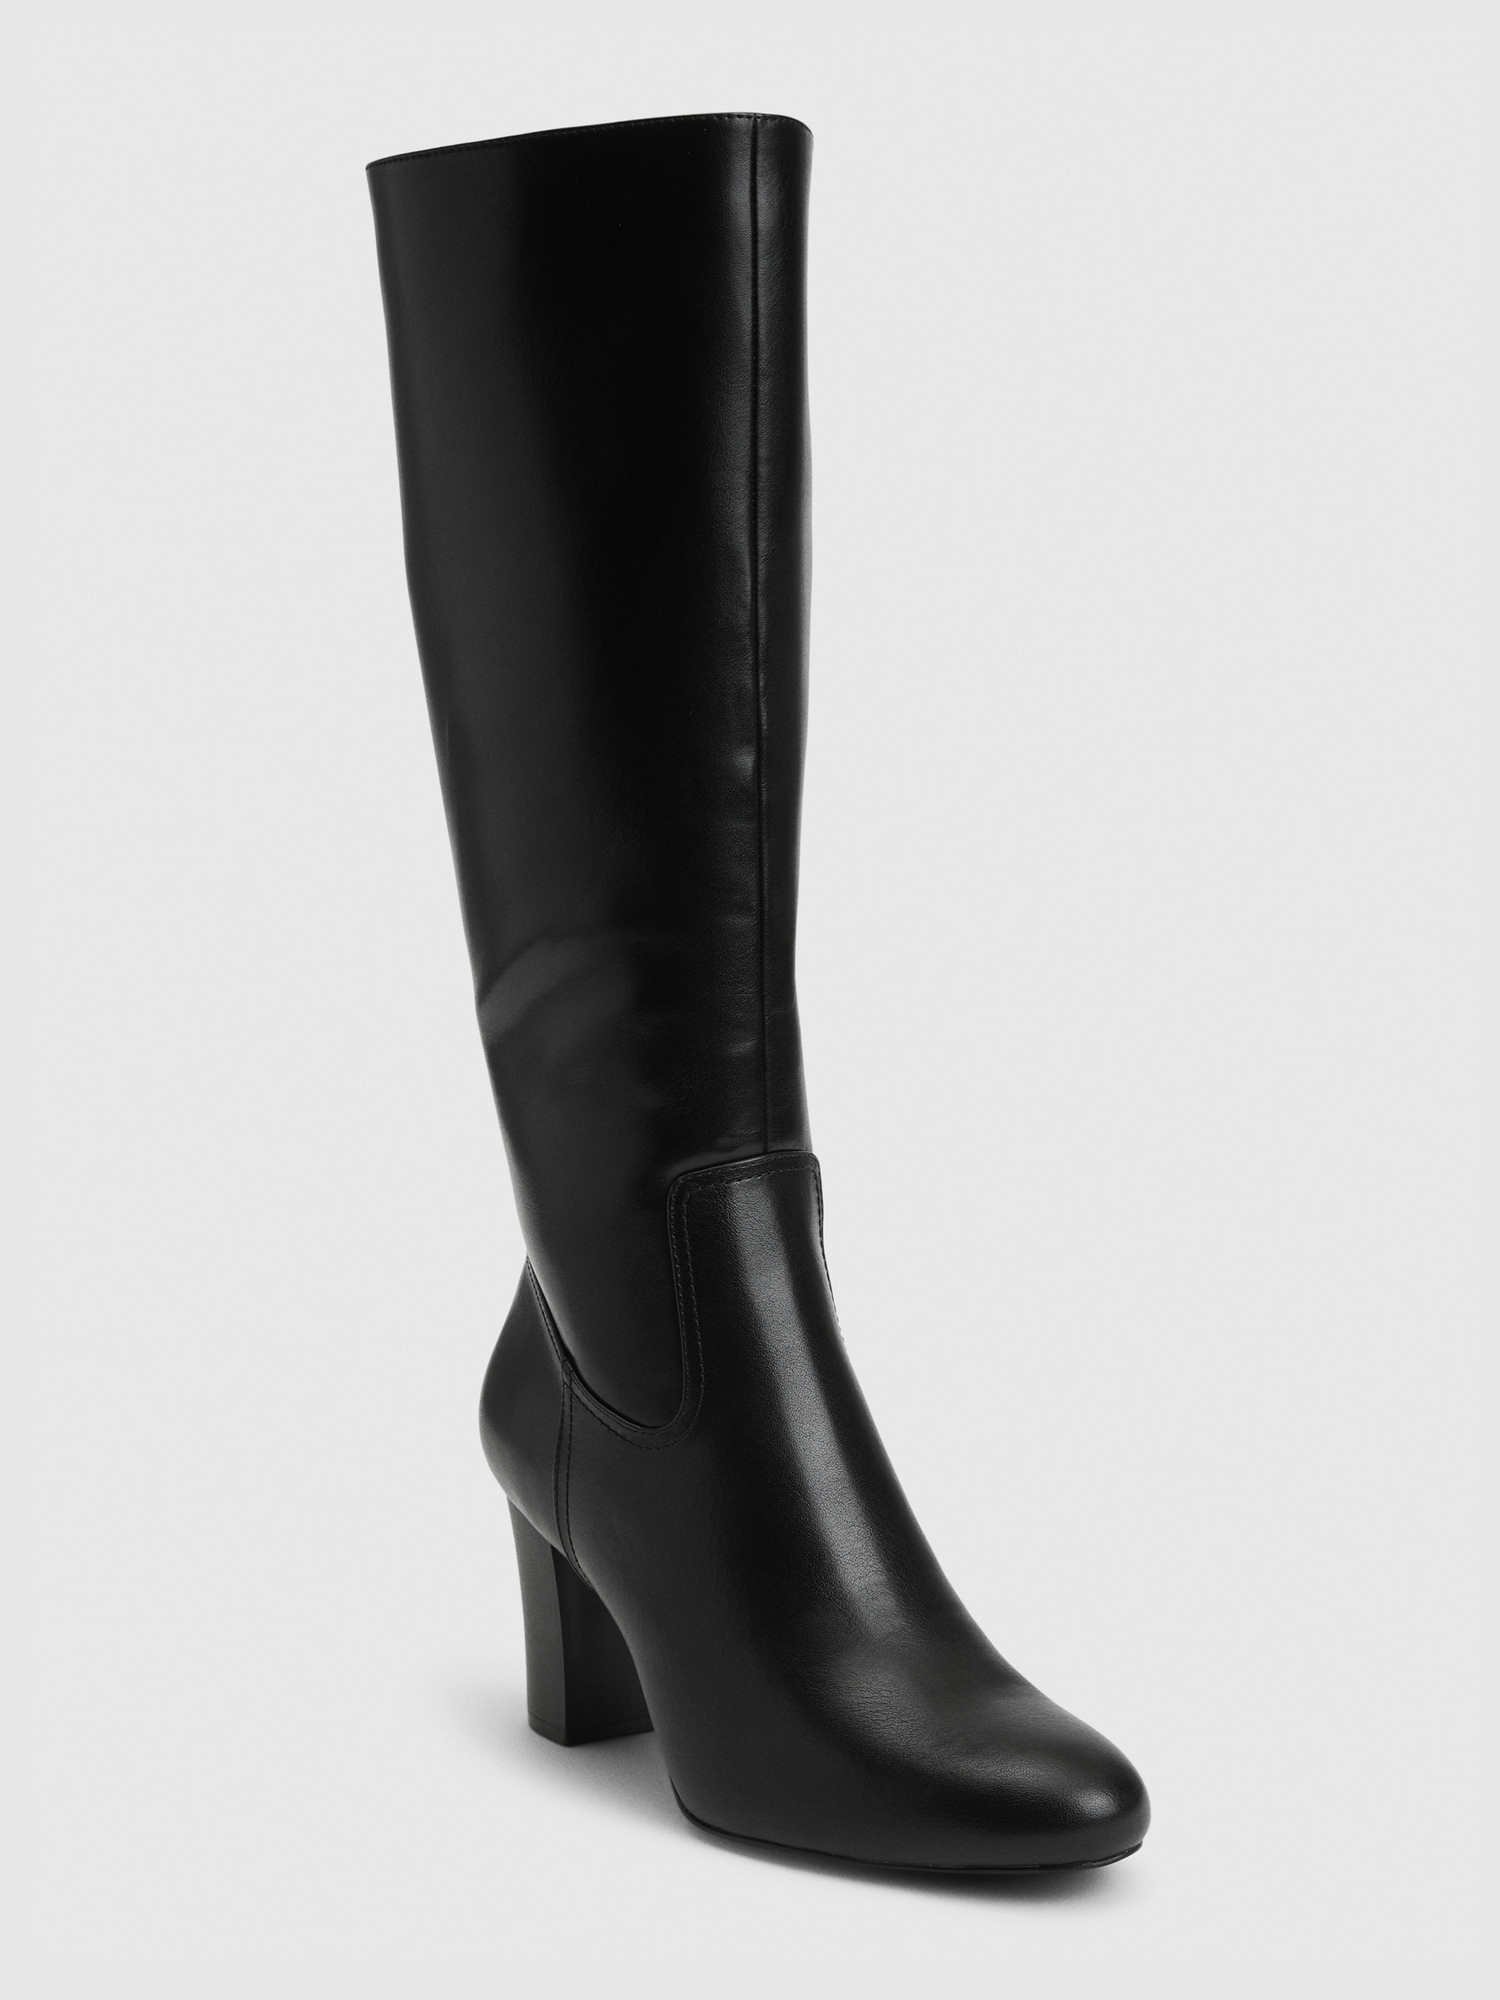 boots with 2 inch heel